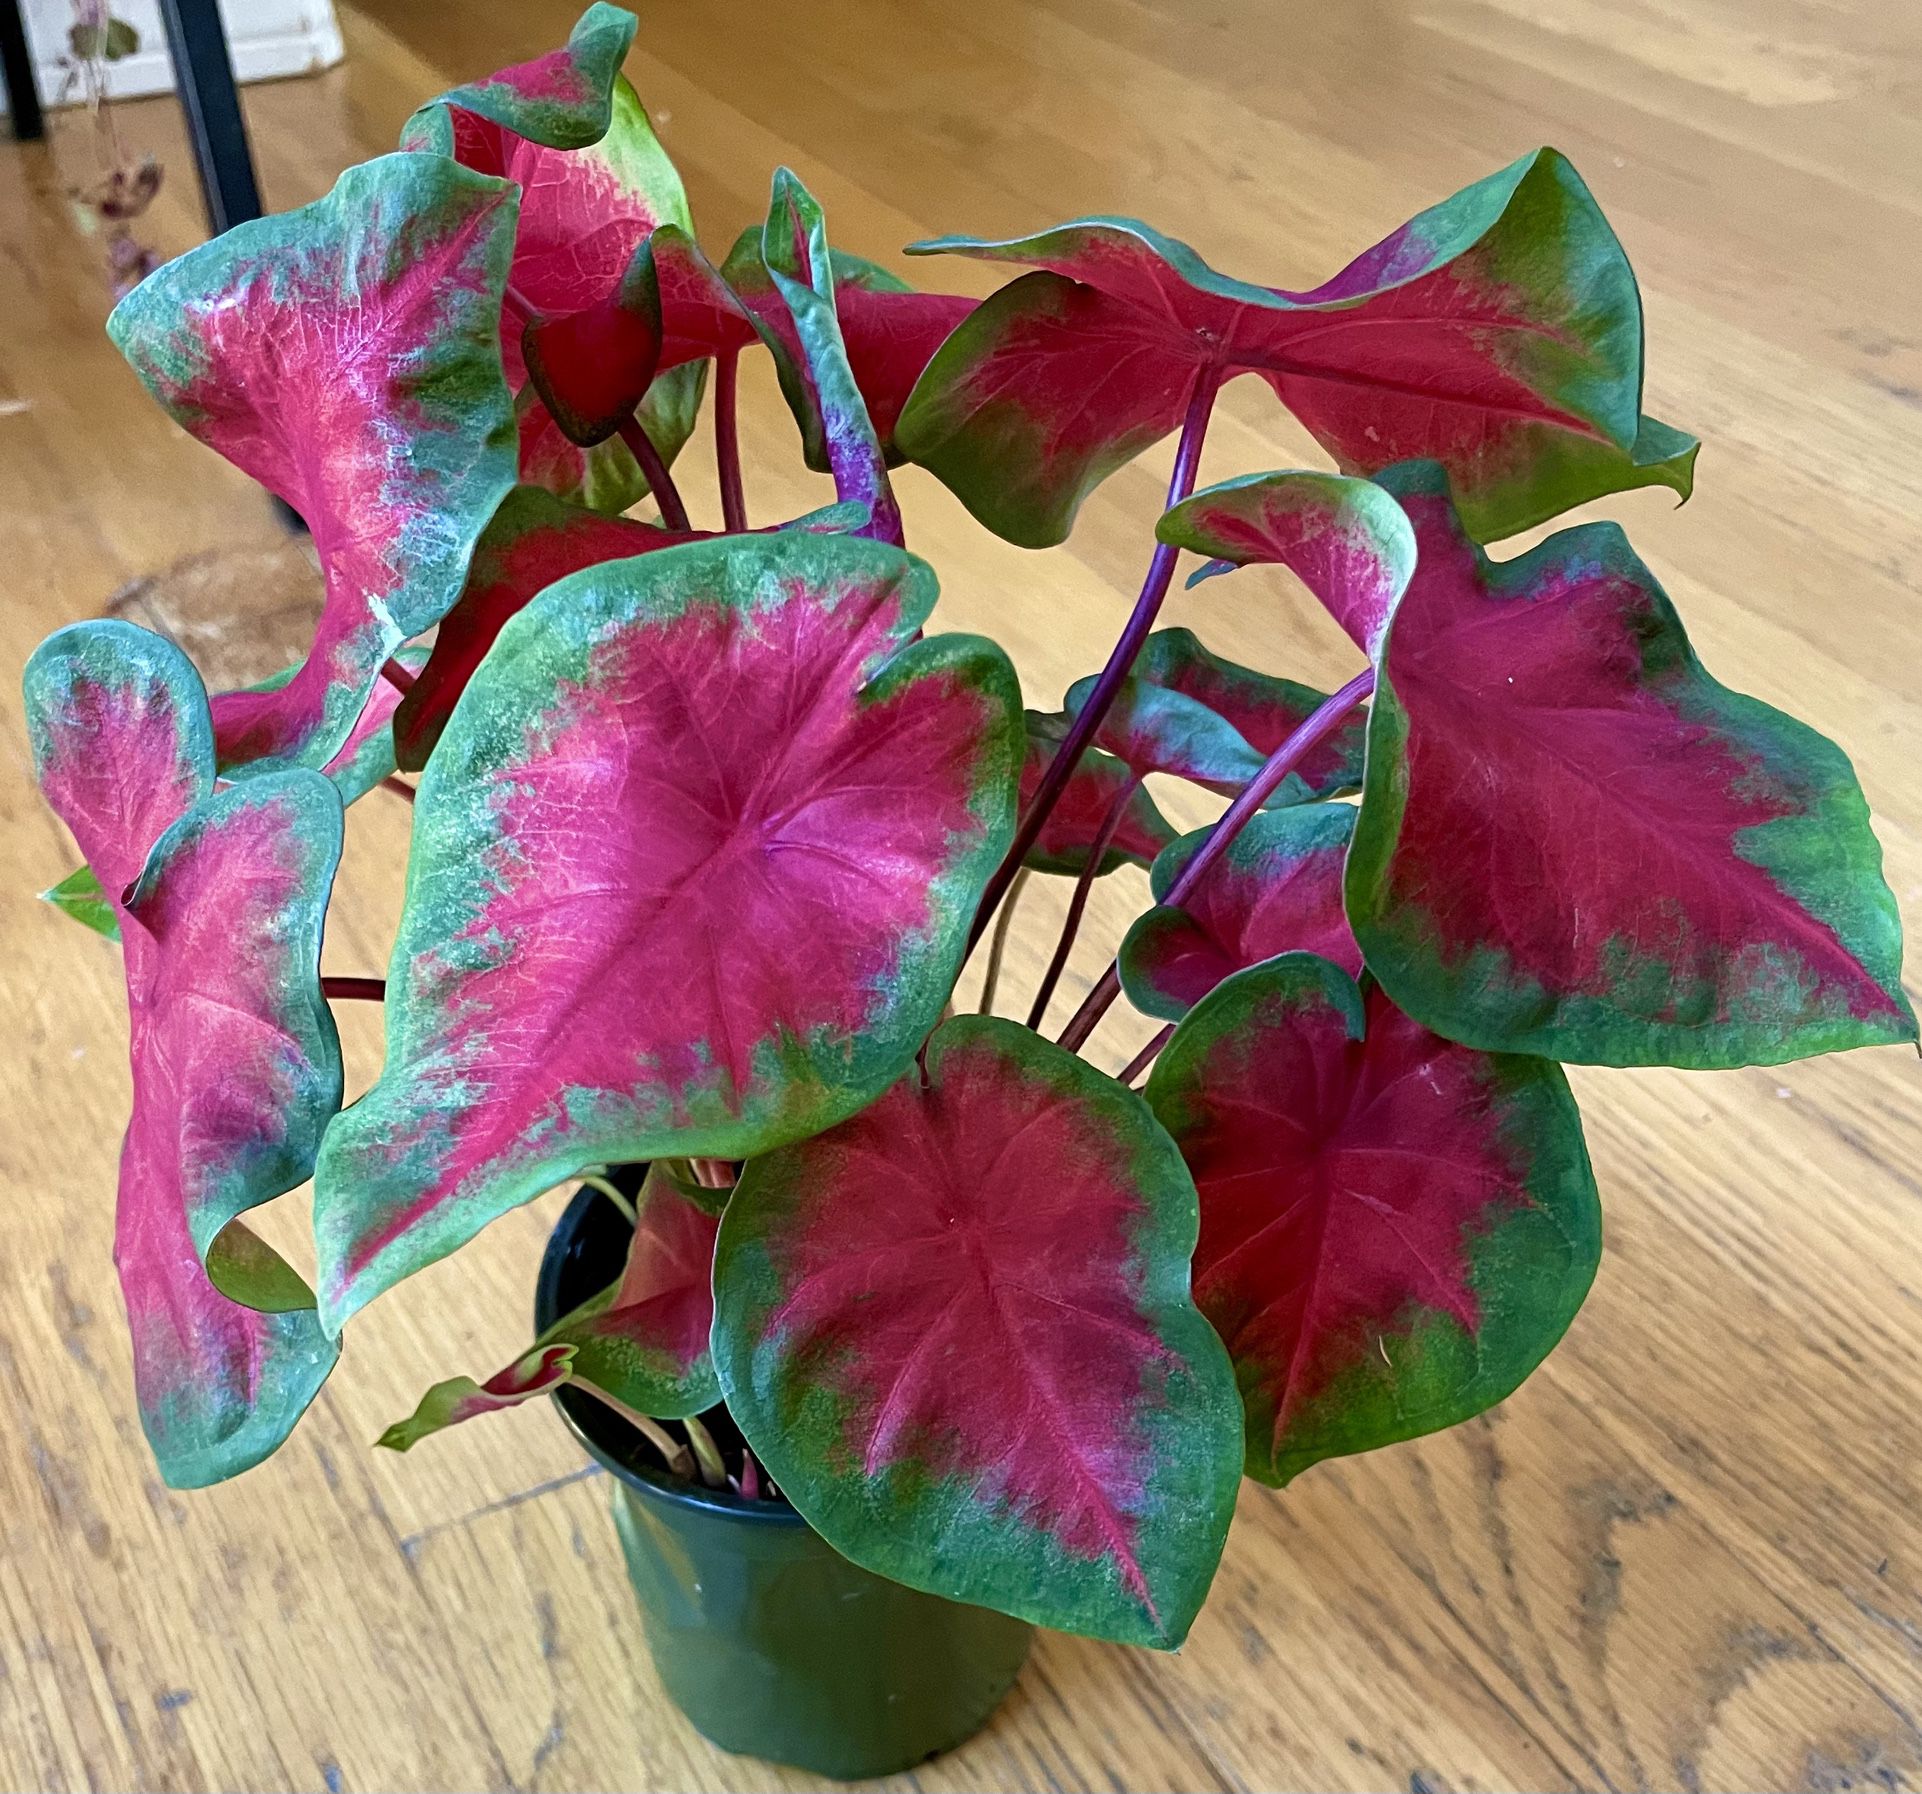 Red Ruffles Caladium Plant / Free Delivery Available 